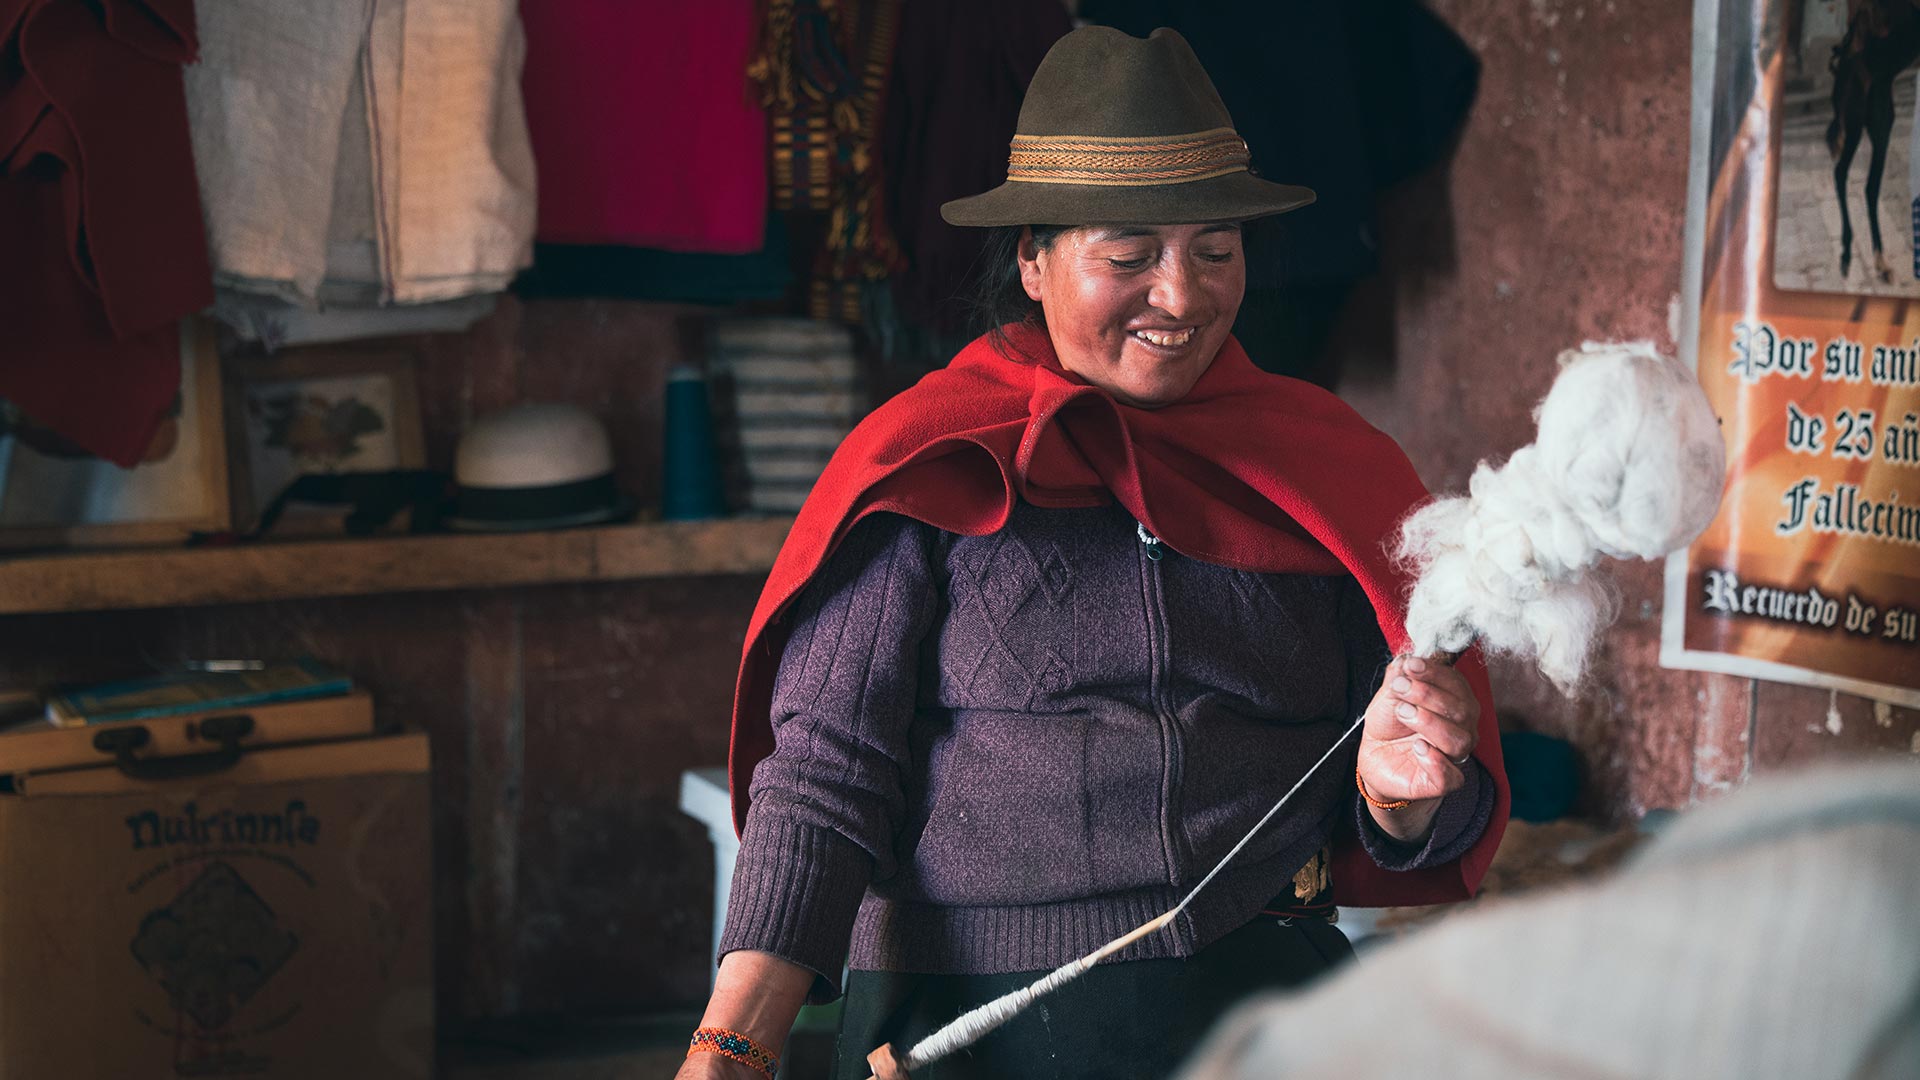 On our Impactful Trip from Baños to Cuenca, you will experience Indigenous Culture and have fun and interesting encounters with the local population who will be happy to share their culture and traditions. Impactful Travel in Ecuador